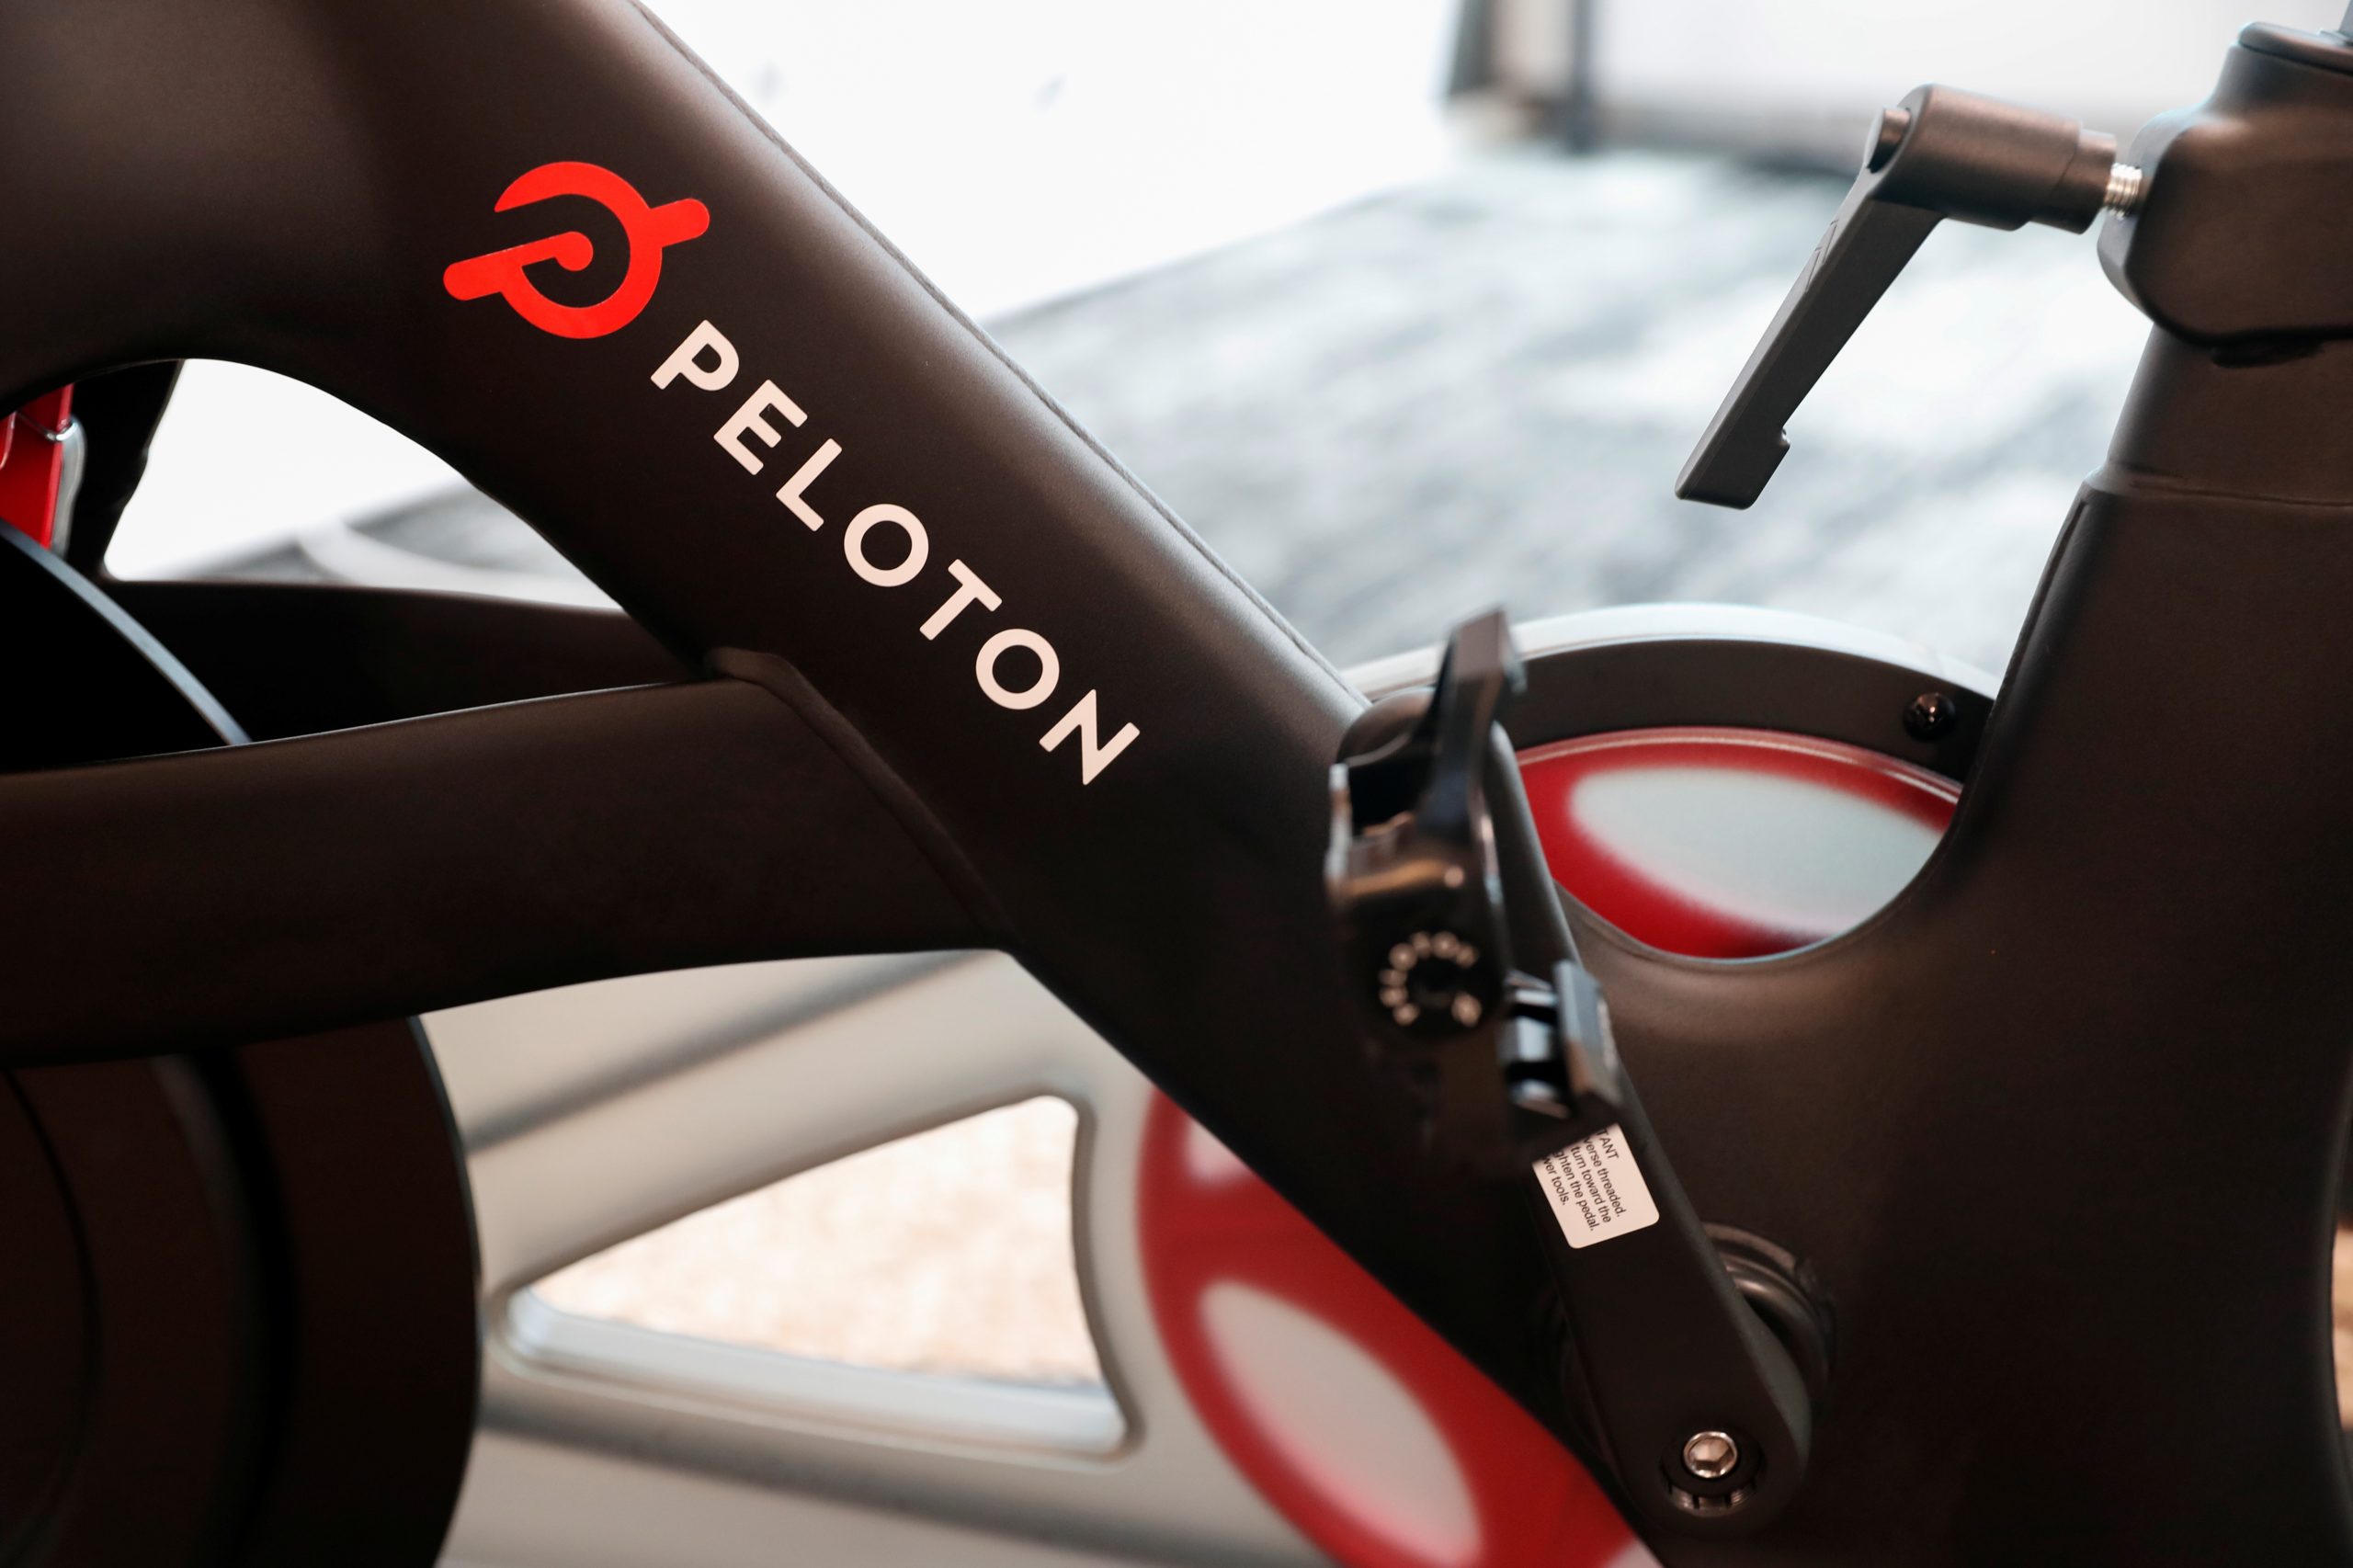 Peloton Android app refers to the long-rumored rowing machine